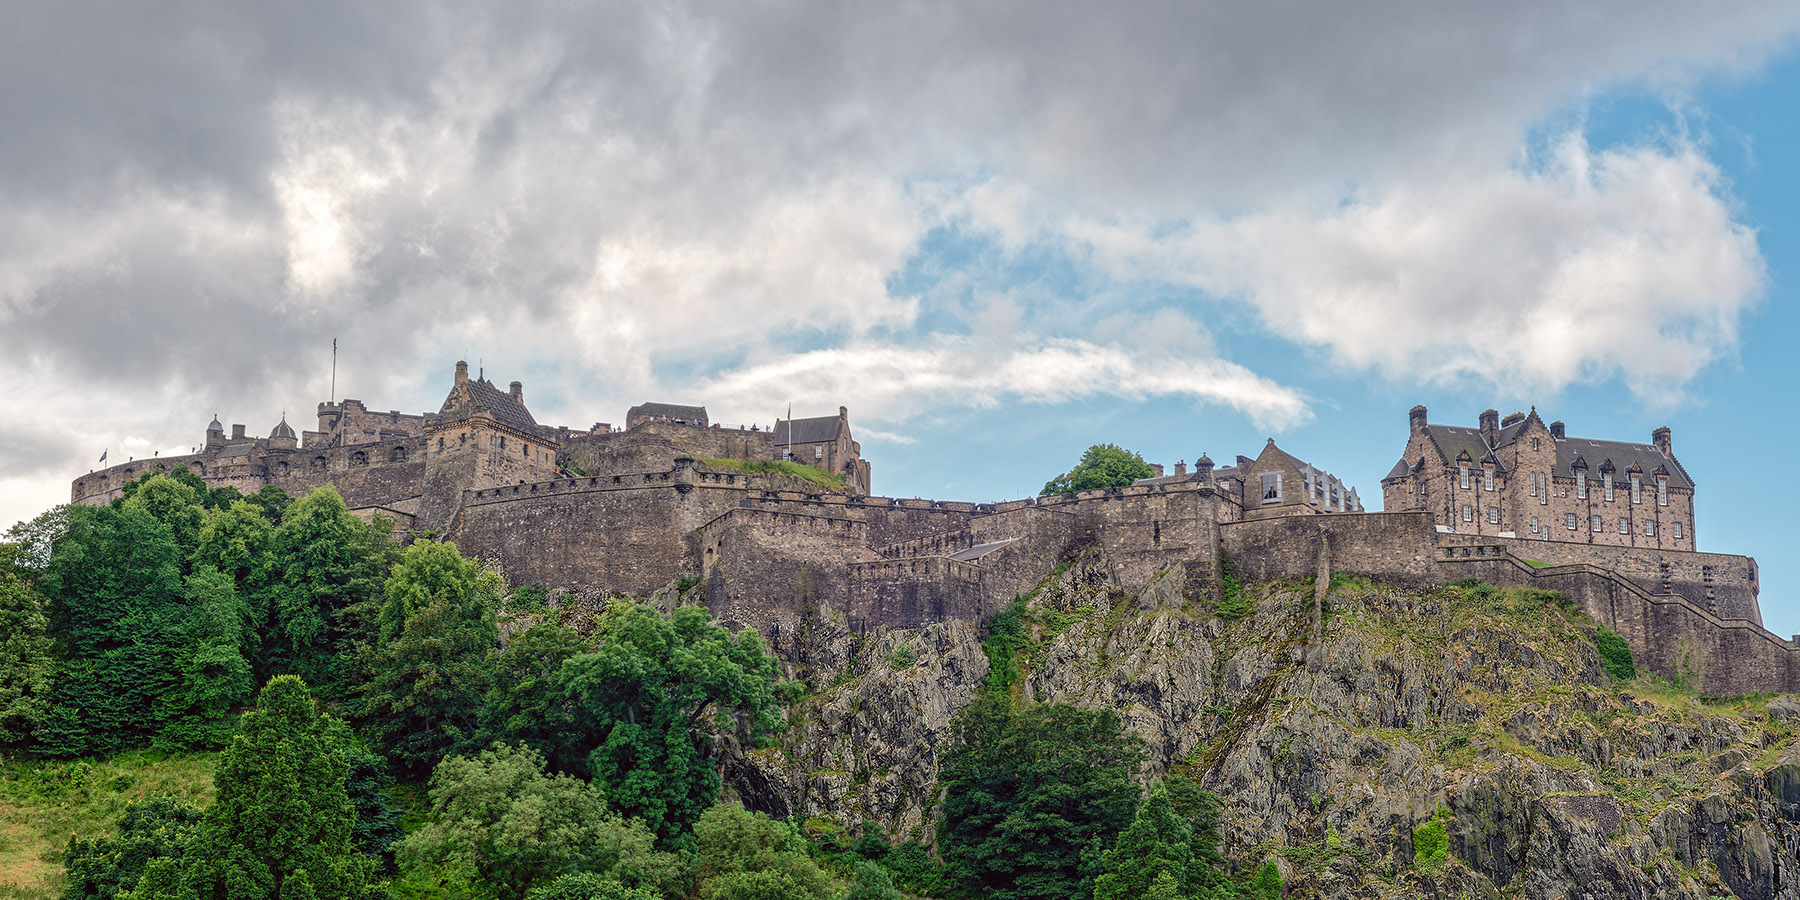 View of Castle Rock from Princes Street Gardens